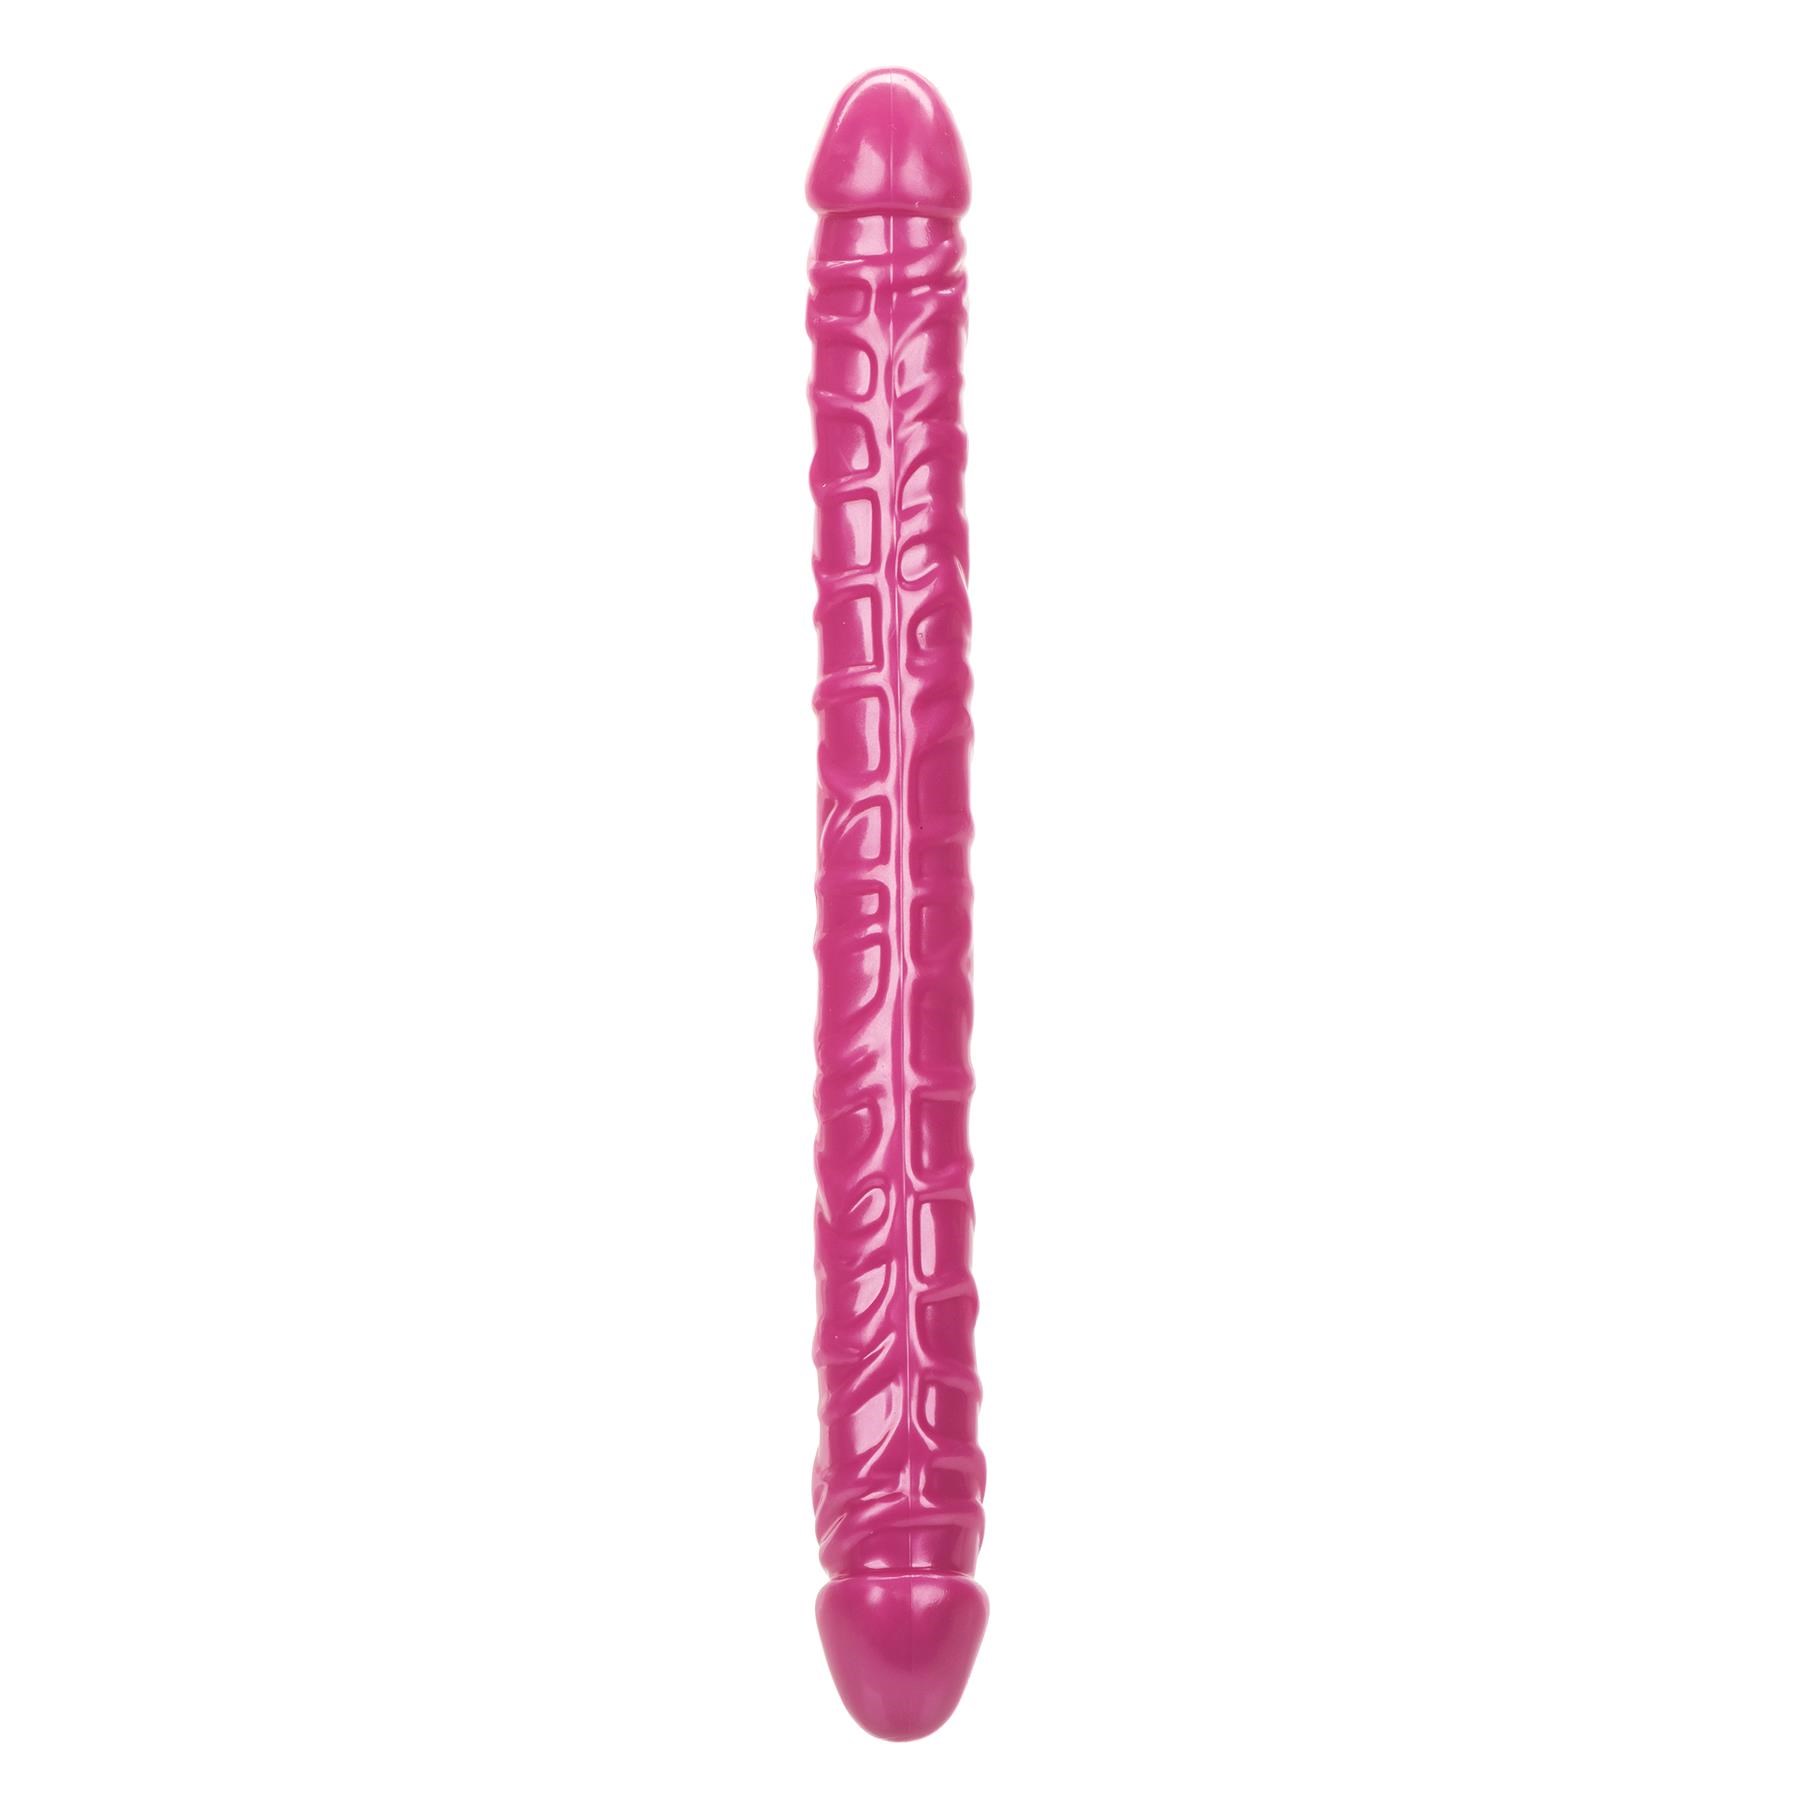 Size Queen 17 Inch Double Dong - Product Shot - Pink